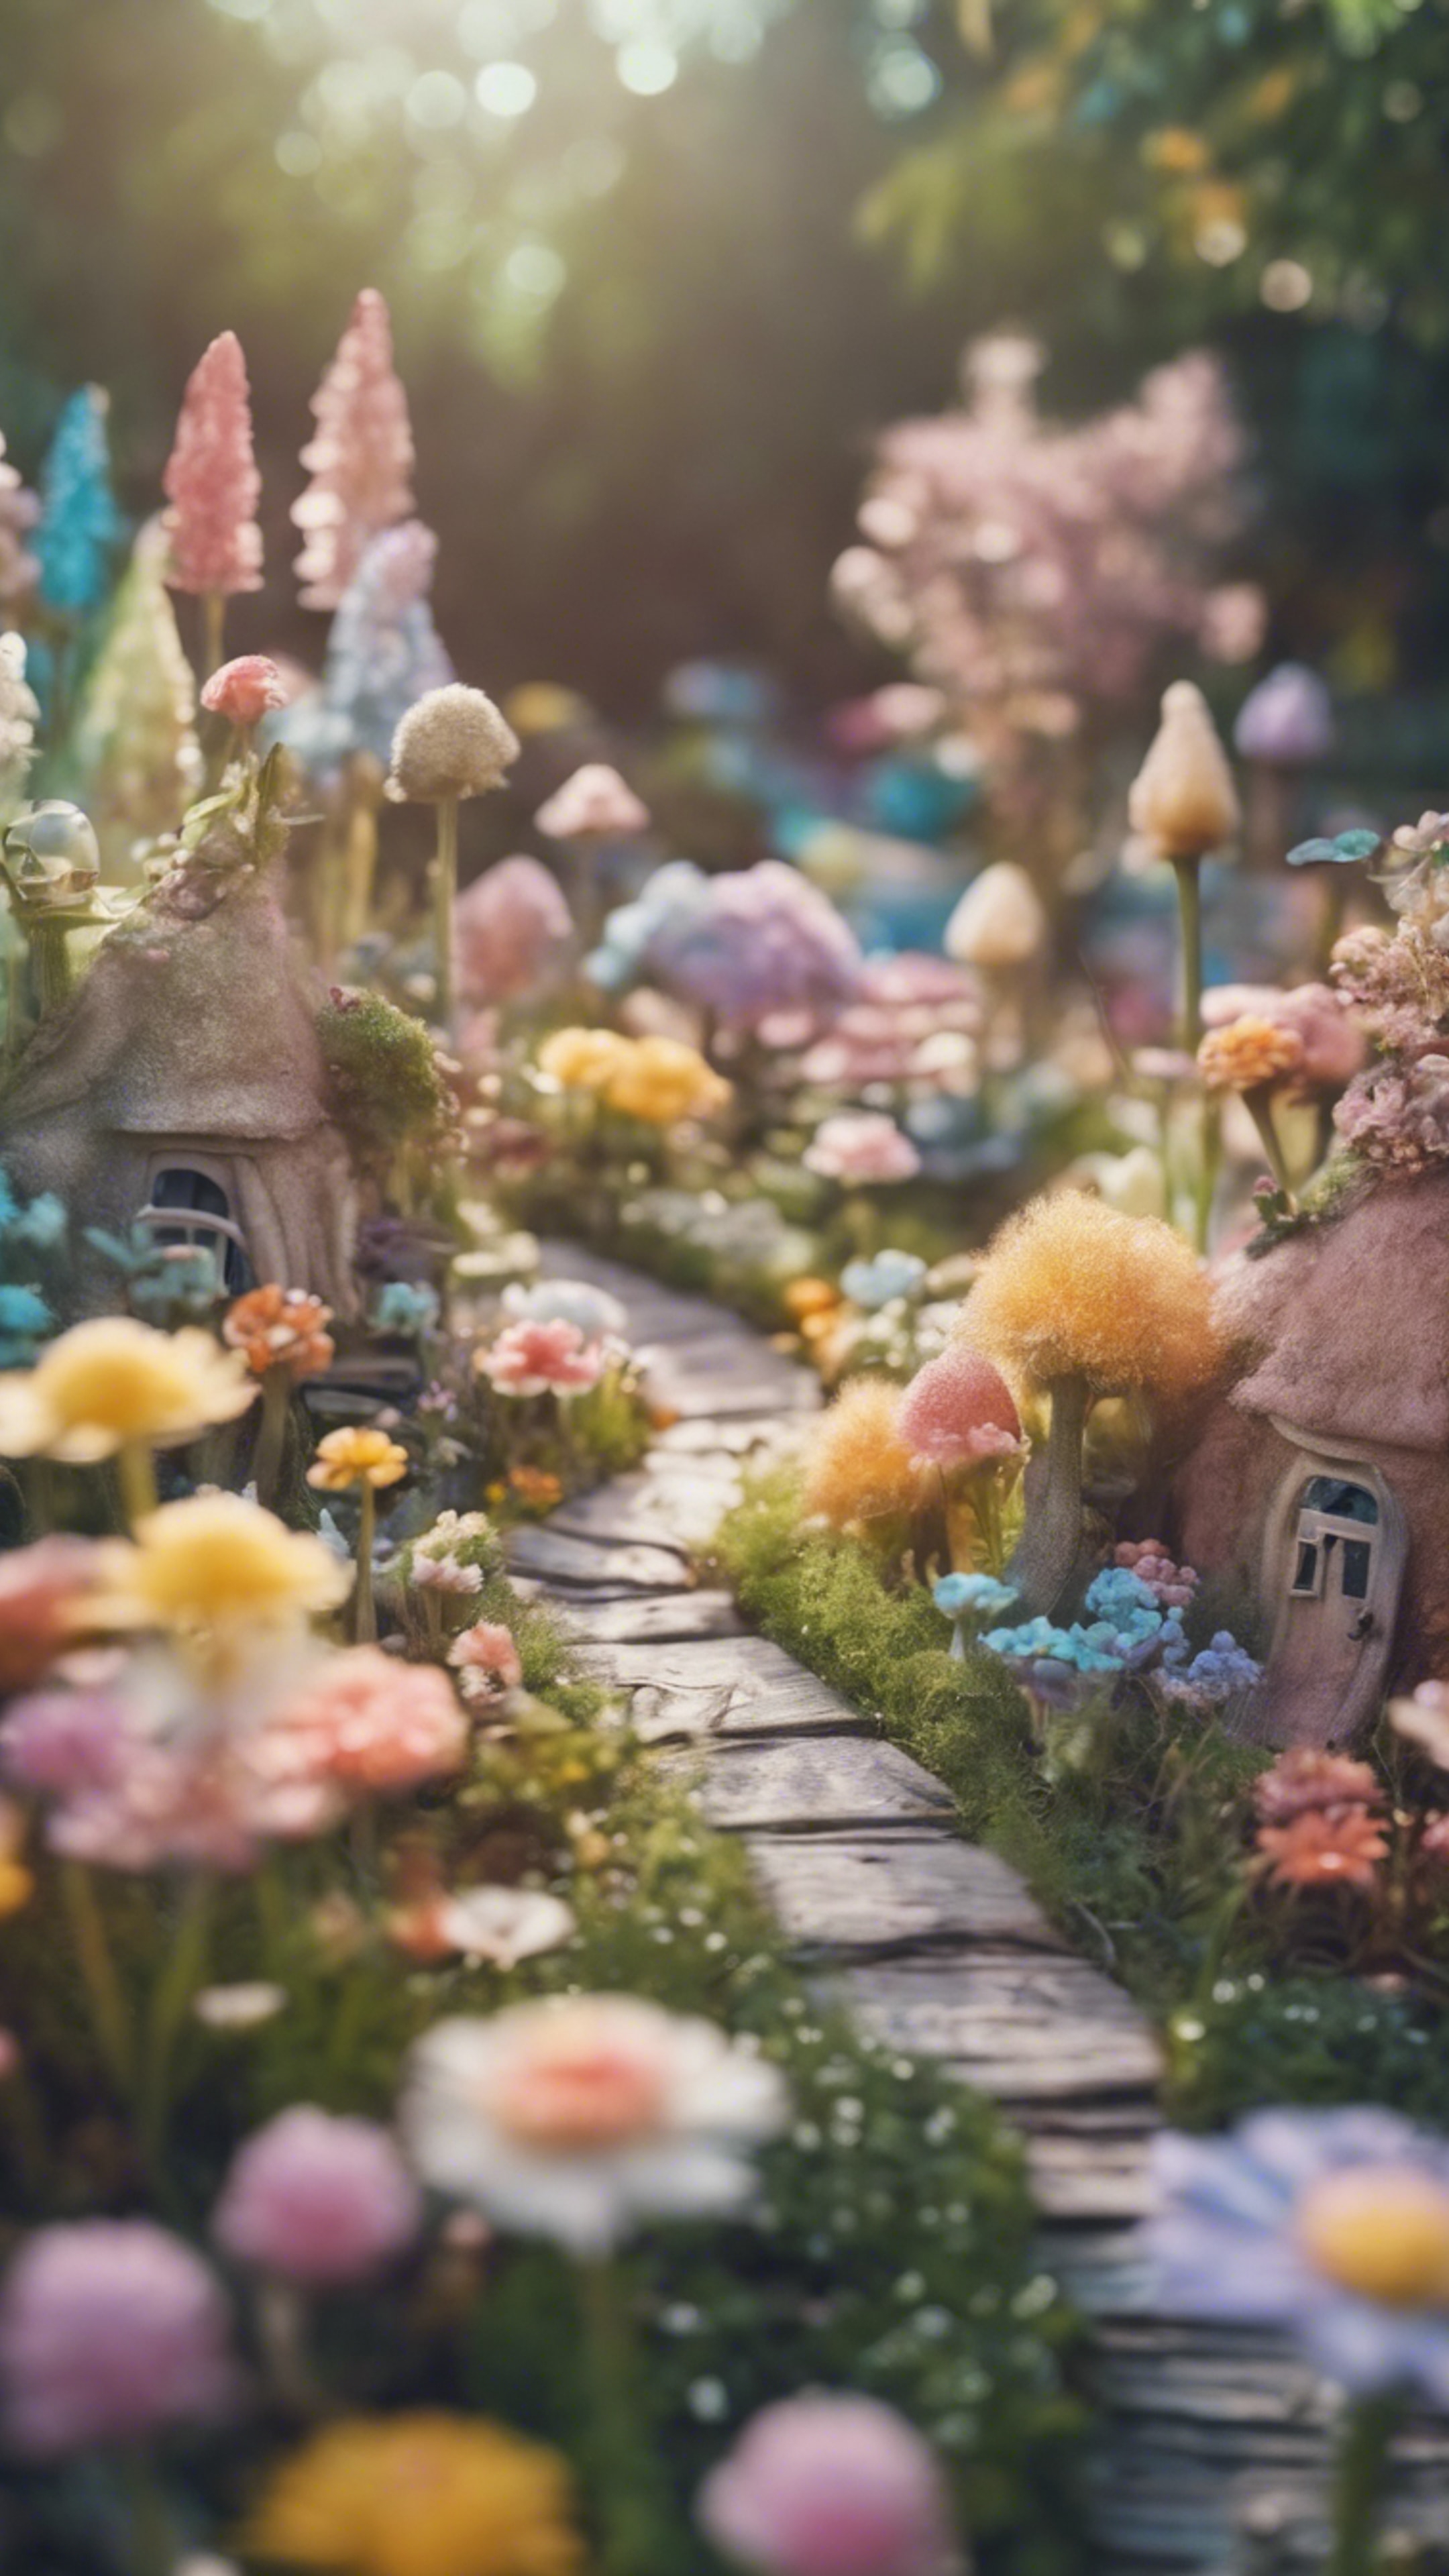 A whimsical fairy garden with pastel flowers blooming under a soft rainbow. Wallpaper[4c59fe9e2ee34c41b656]